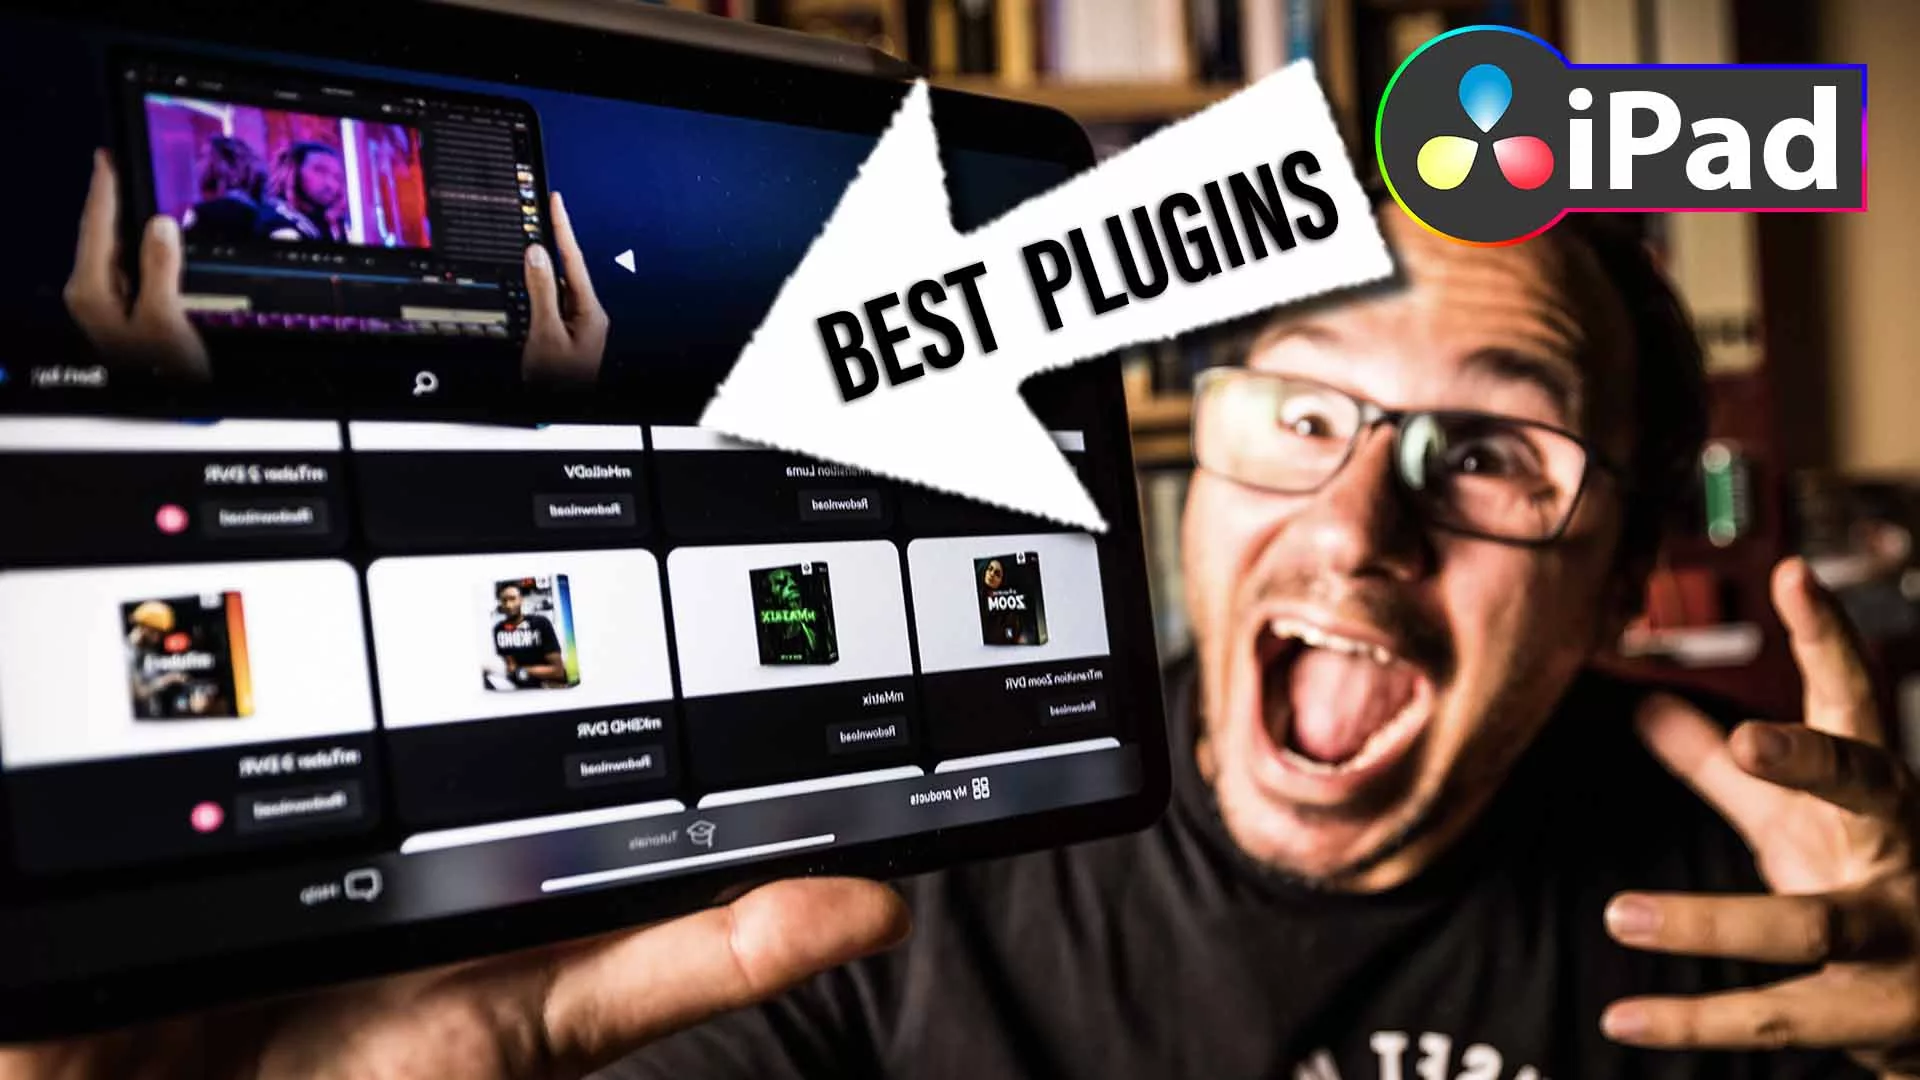 Best Plugins for DaVinci Resolve iPad you need to know!